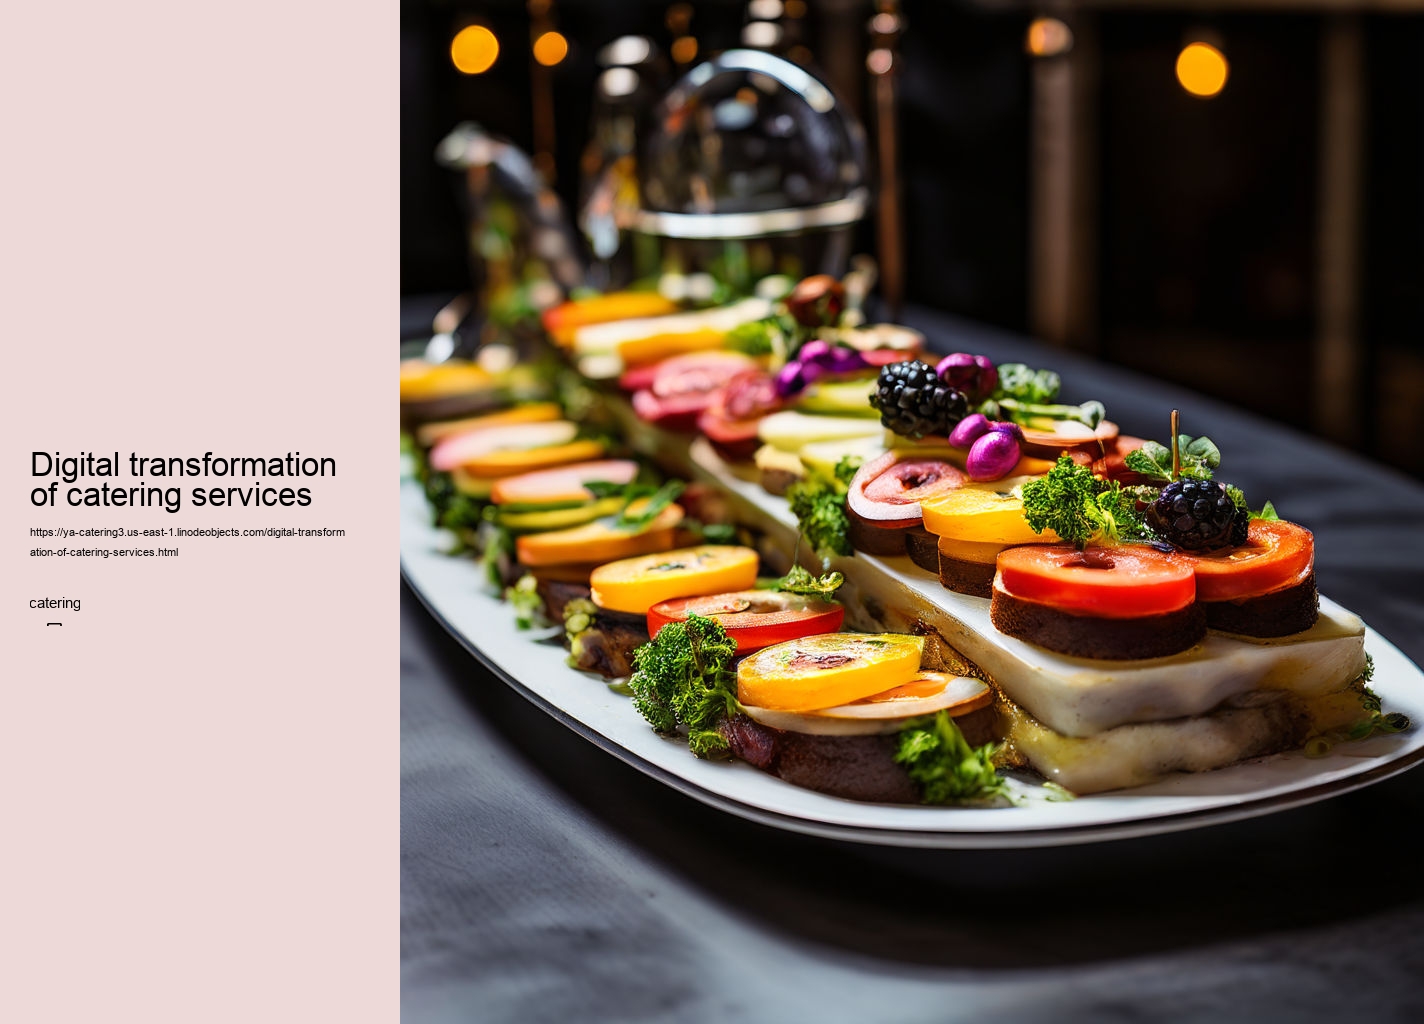 Digital transformation of catering services